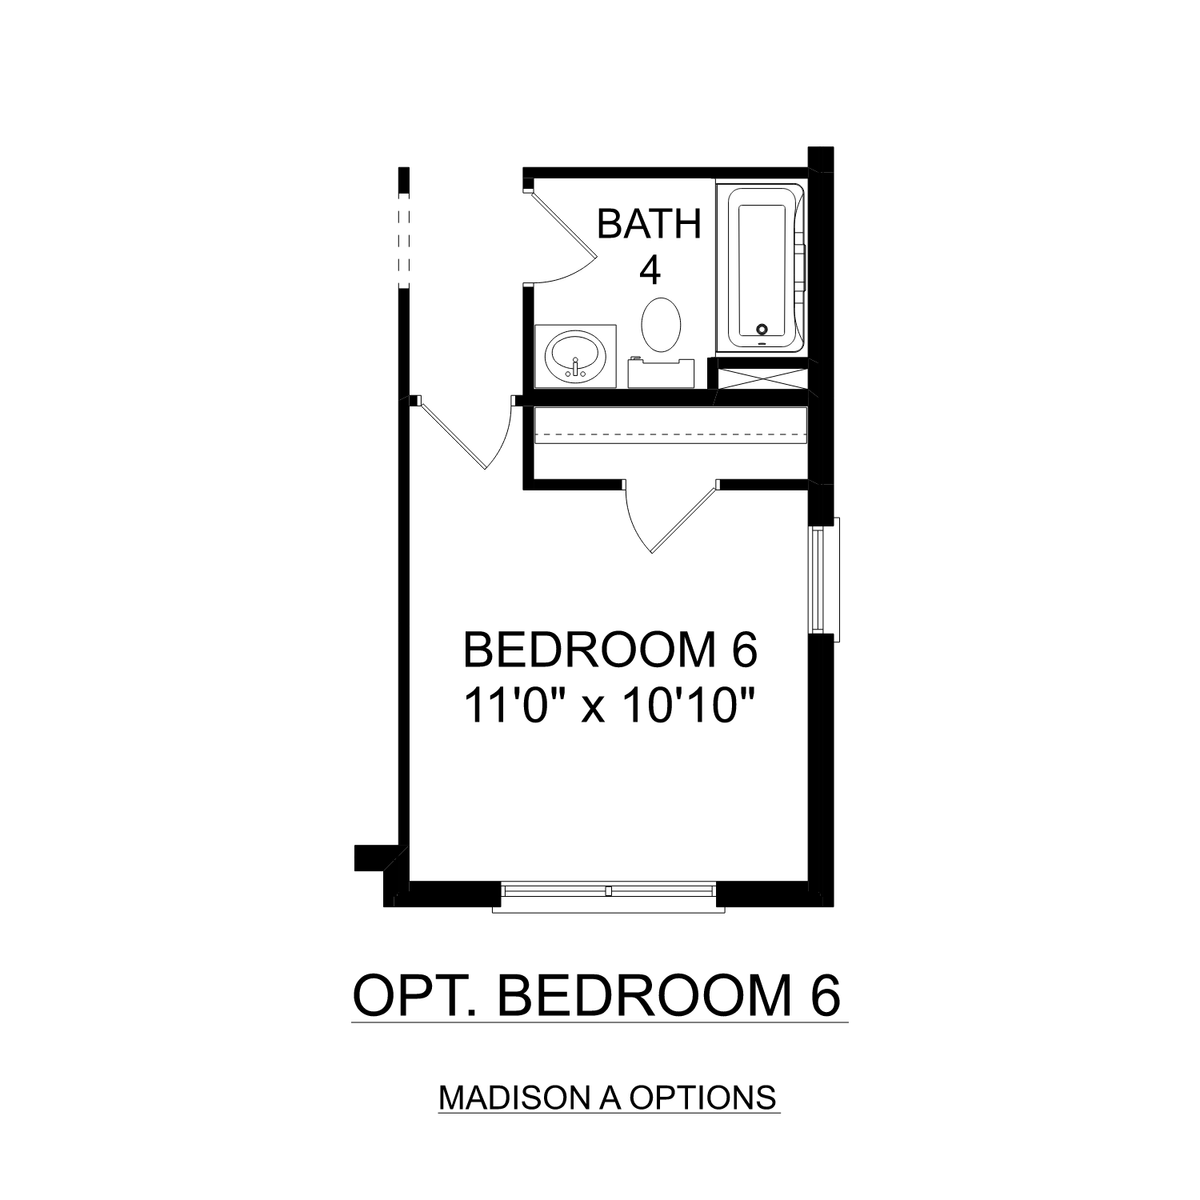 3 - The Madison A buildable floor plan layout in Davidson Homes' Barnett's Crossing community.